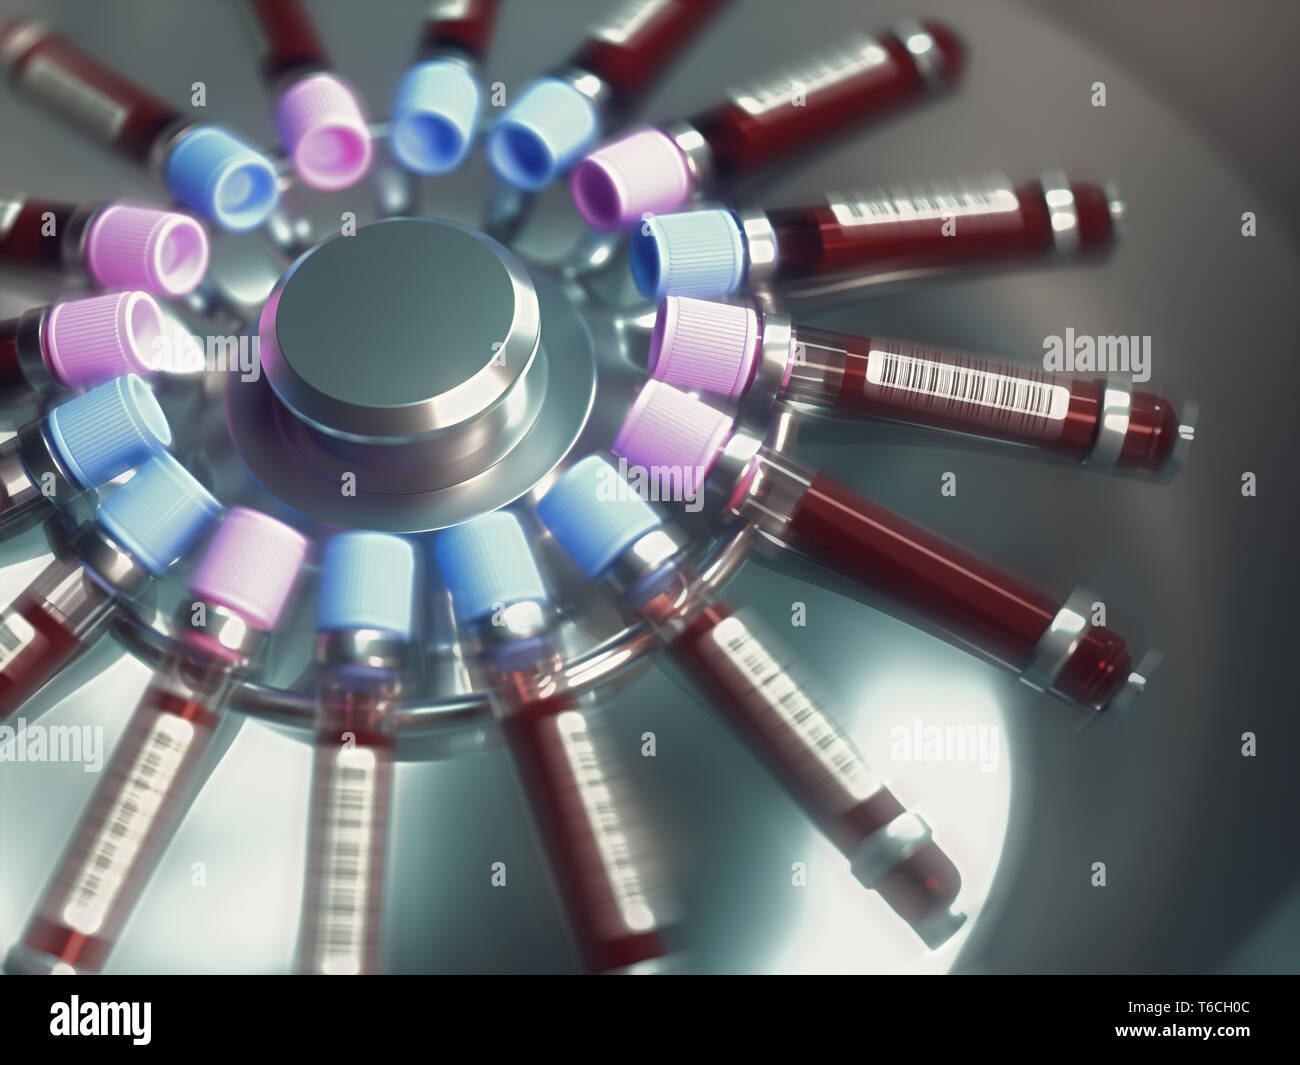 Lab equipment centrifuging blood. Concept image of a blood test. 3D illustration. Stock Photo